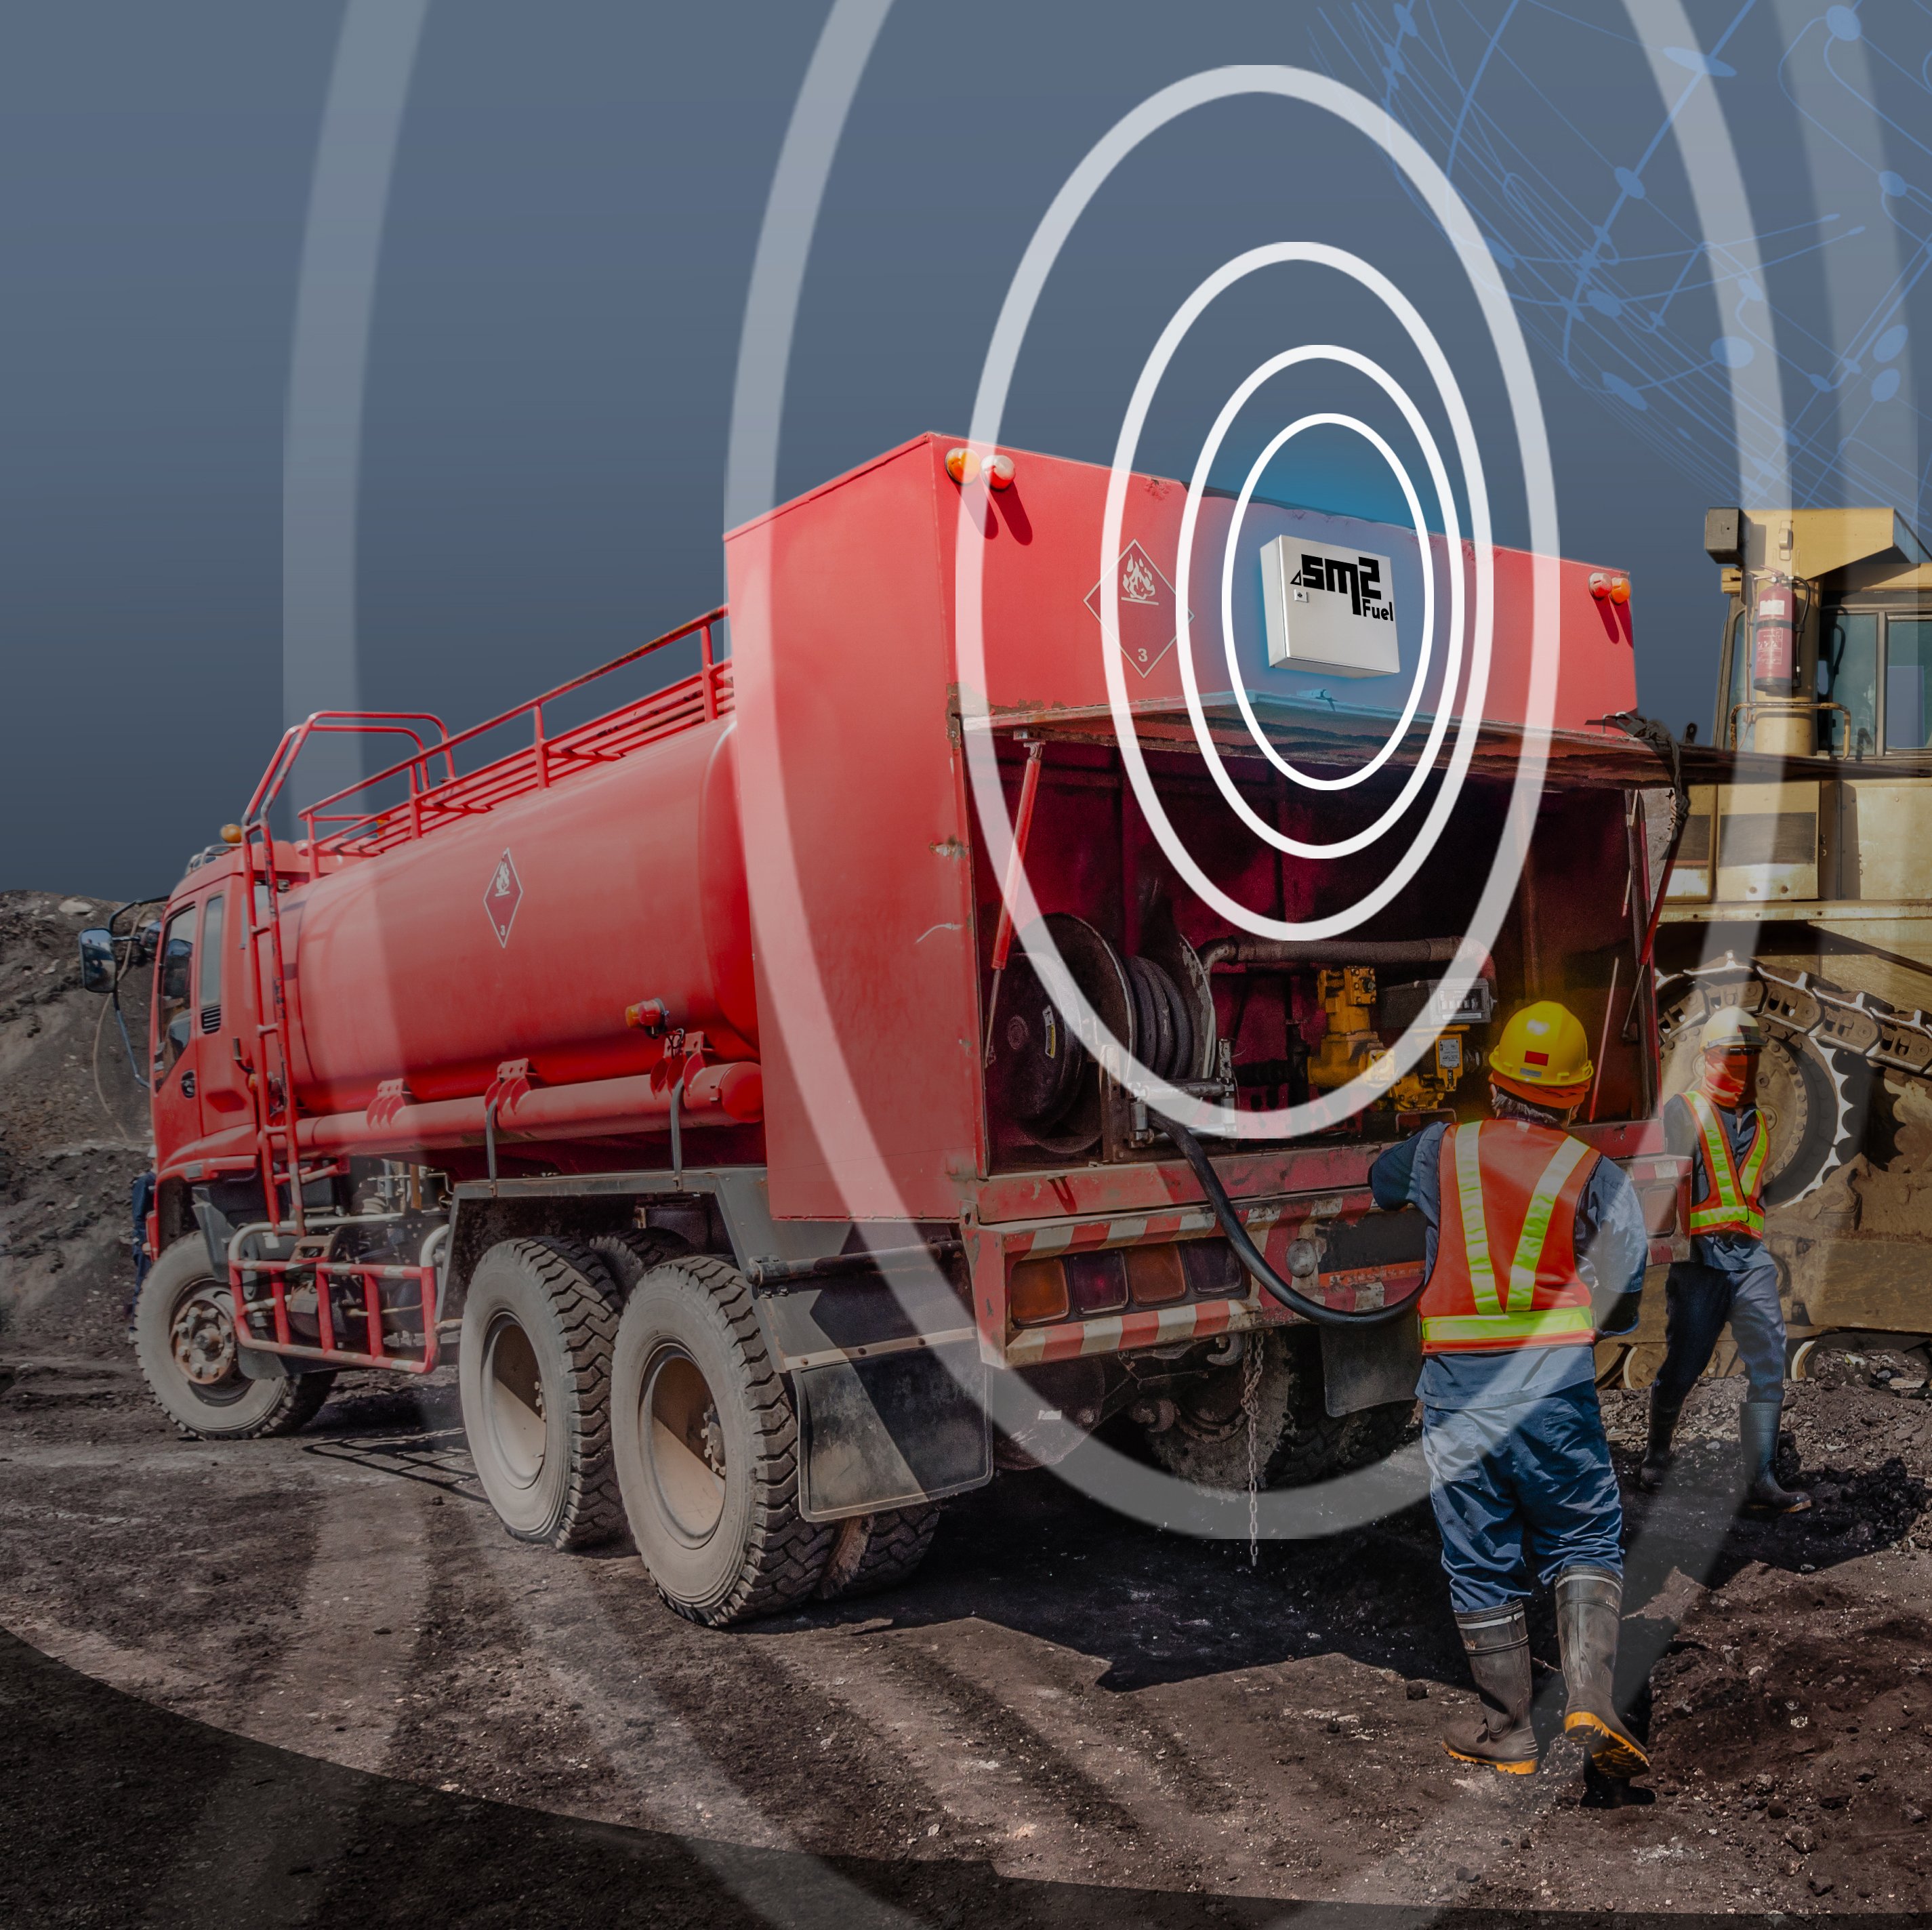 Worker behind a fuel truck in a construction field filling construction vehicles with fuel using SM2 Fuel Tanker Management System from Coencorp